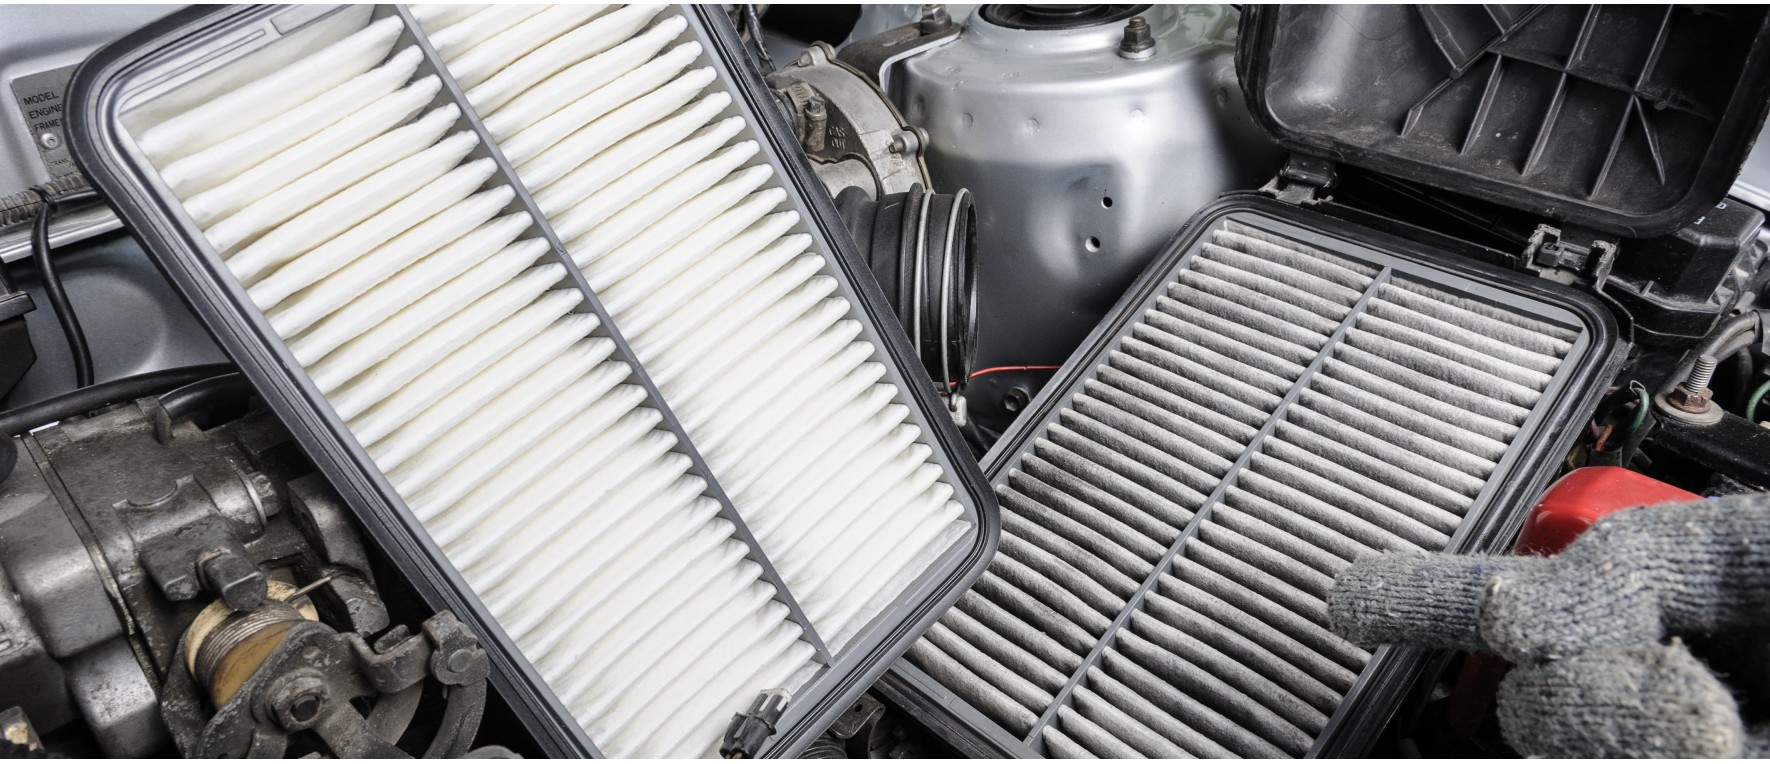 Advantages of replacing an air filter